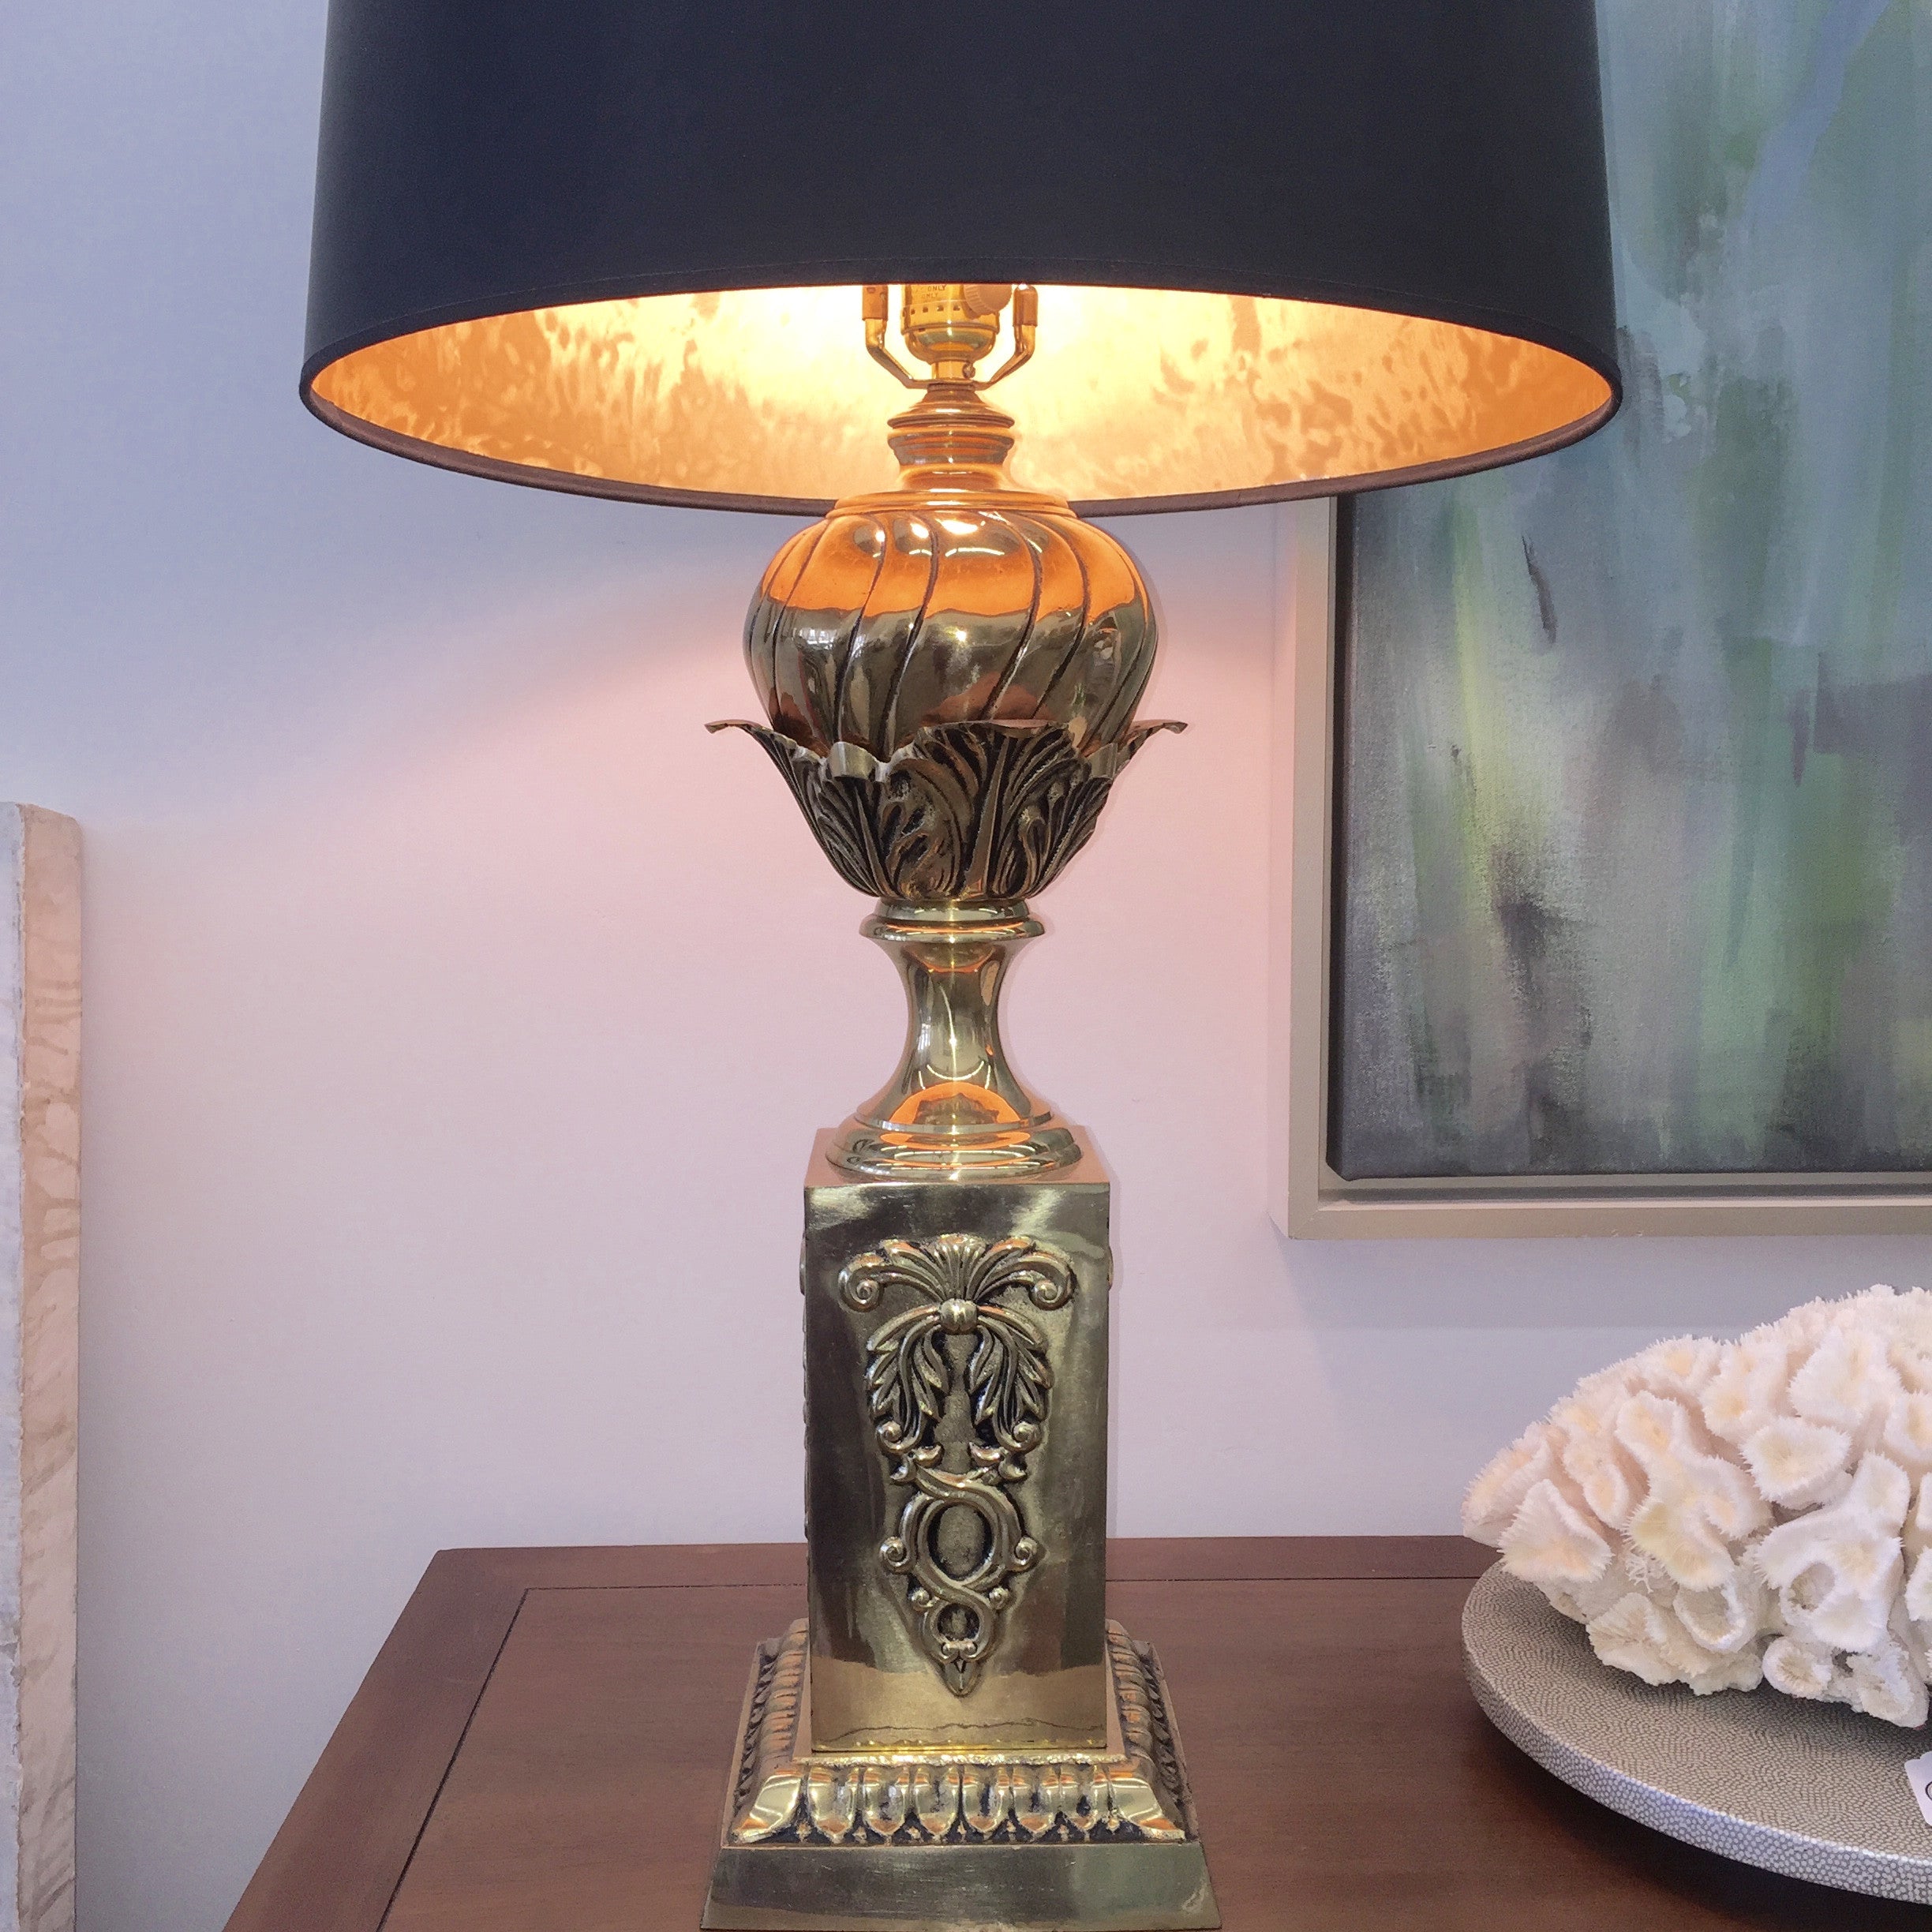 Vintage Italian Solid Brass Lamps (Pair) - Park + Eighth